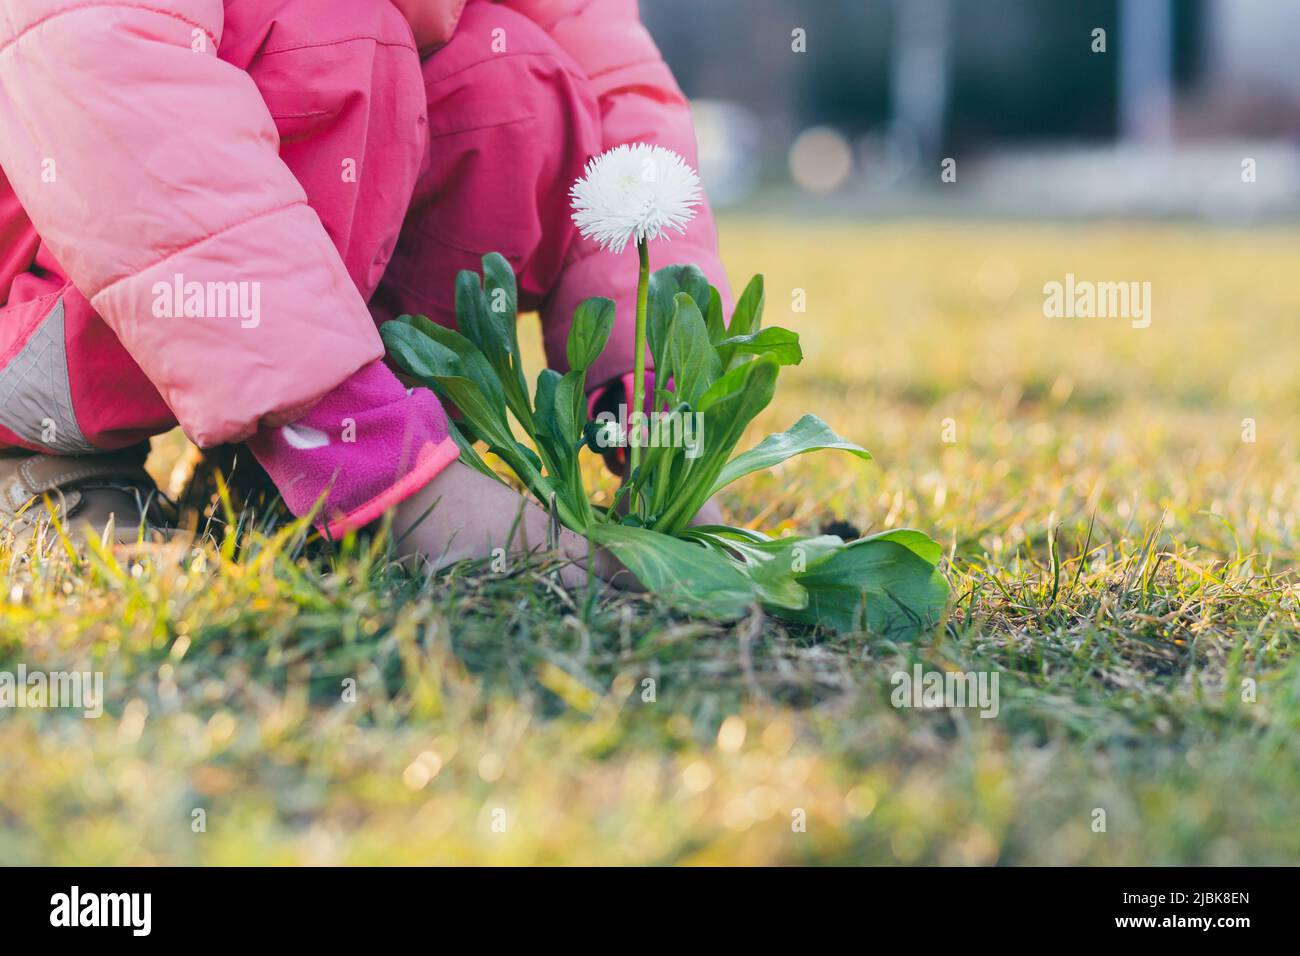 Close up photo Hands of a little girl plant flowers, plants in the ground on the street in spring Stock Photo